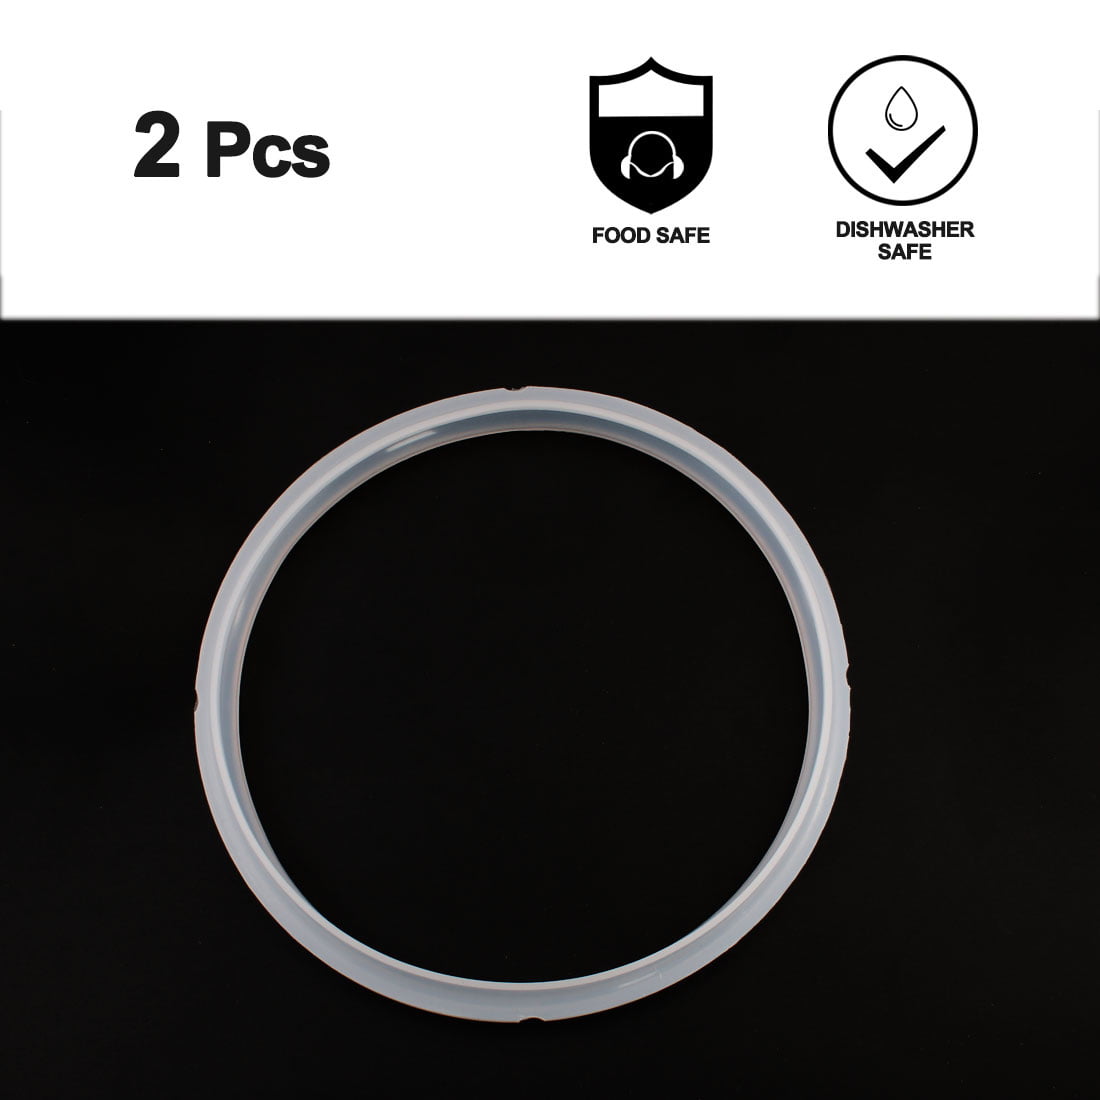 Electric Pressure Cooker Replacement Rubber Sealing Ring Accessories 5L/6L  | eBay